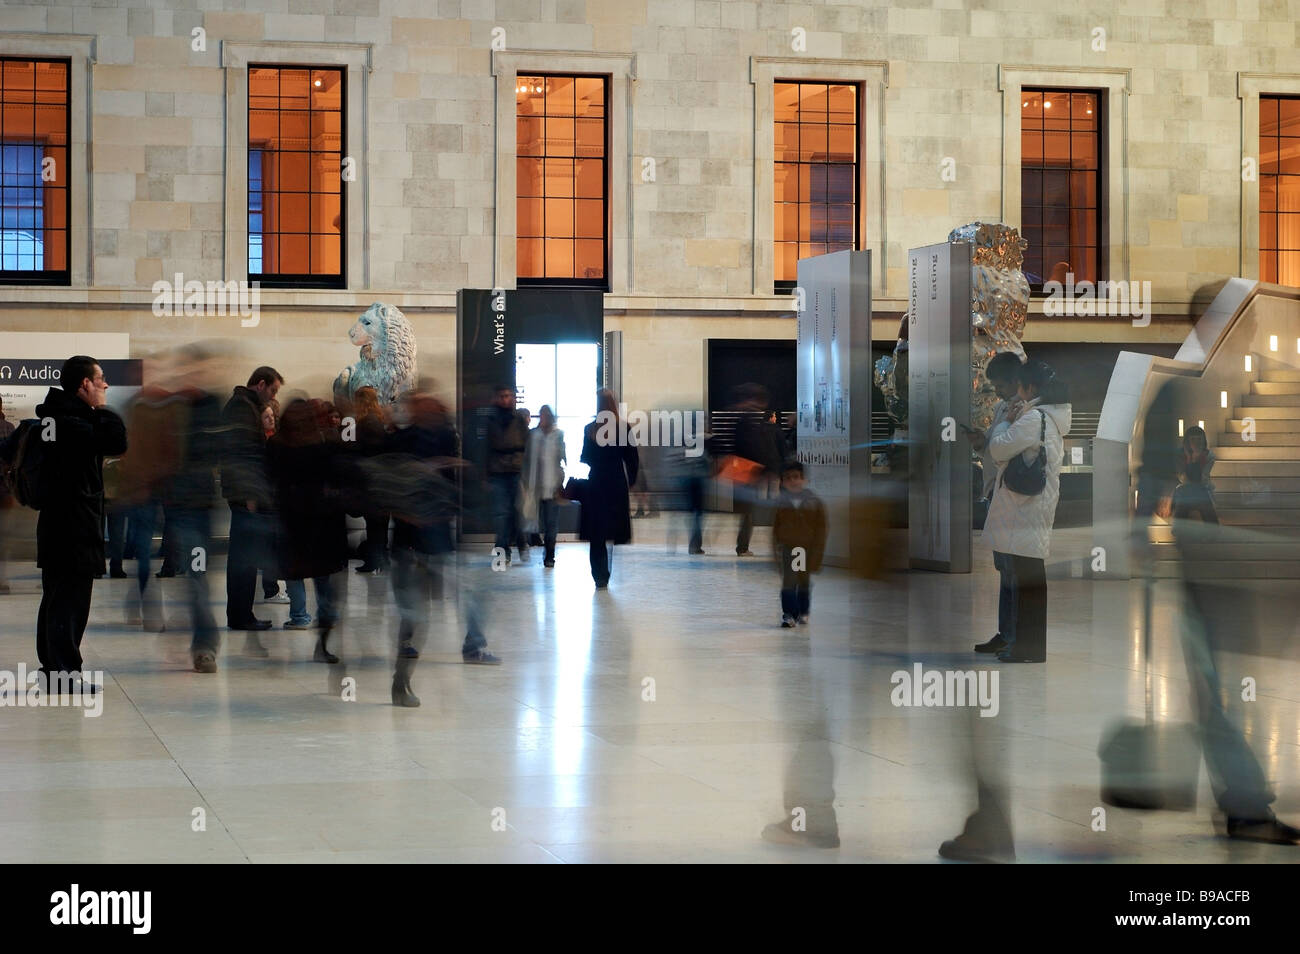 The British Museum, London. Interior of 'The Great Court' (Time lapse image shows visitors as ghostly figures). Stock Photo